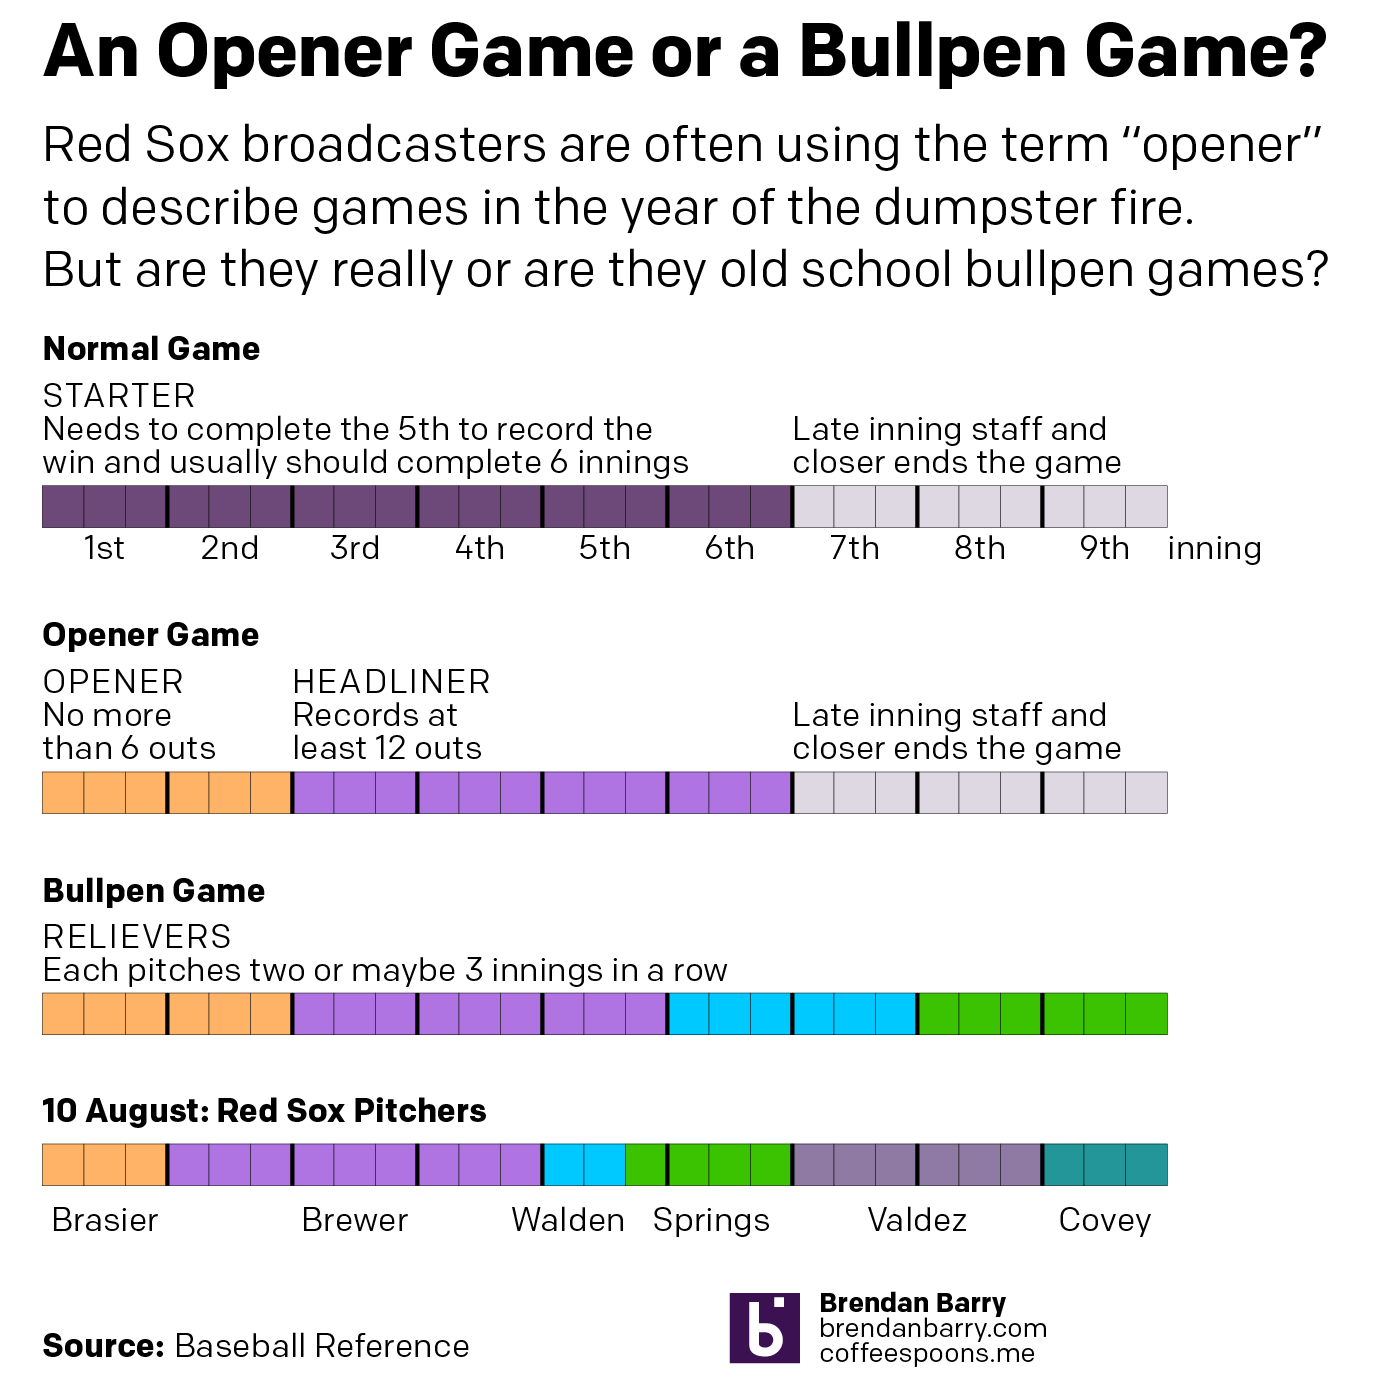 What is an opener and how does it compare to a bullpen game?